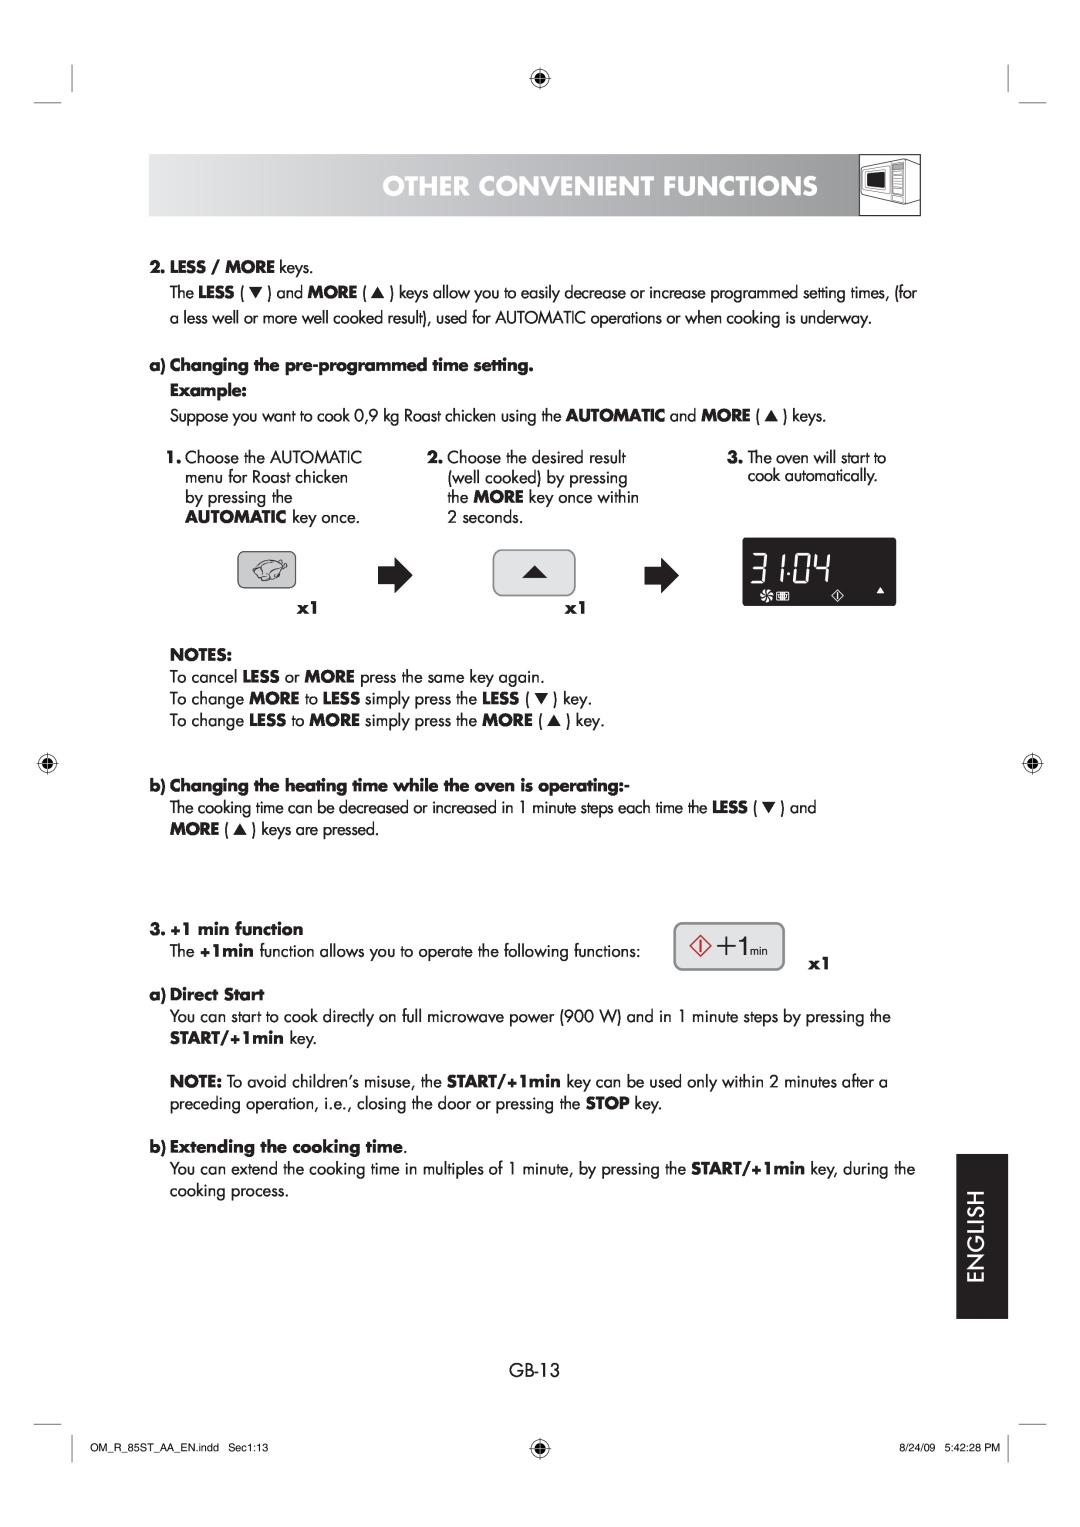 Sharp R-85ST-AA operation manual Other Convenient Functions, English, GB-13, The oven will start to, cook automatically 